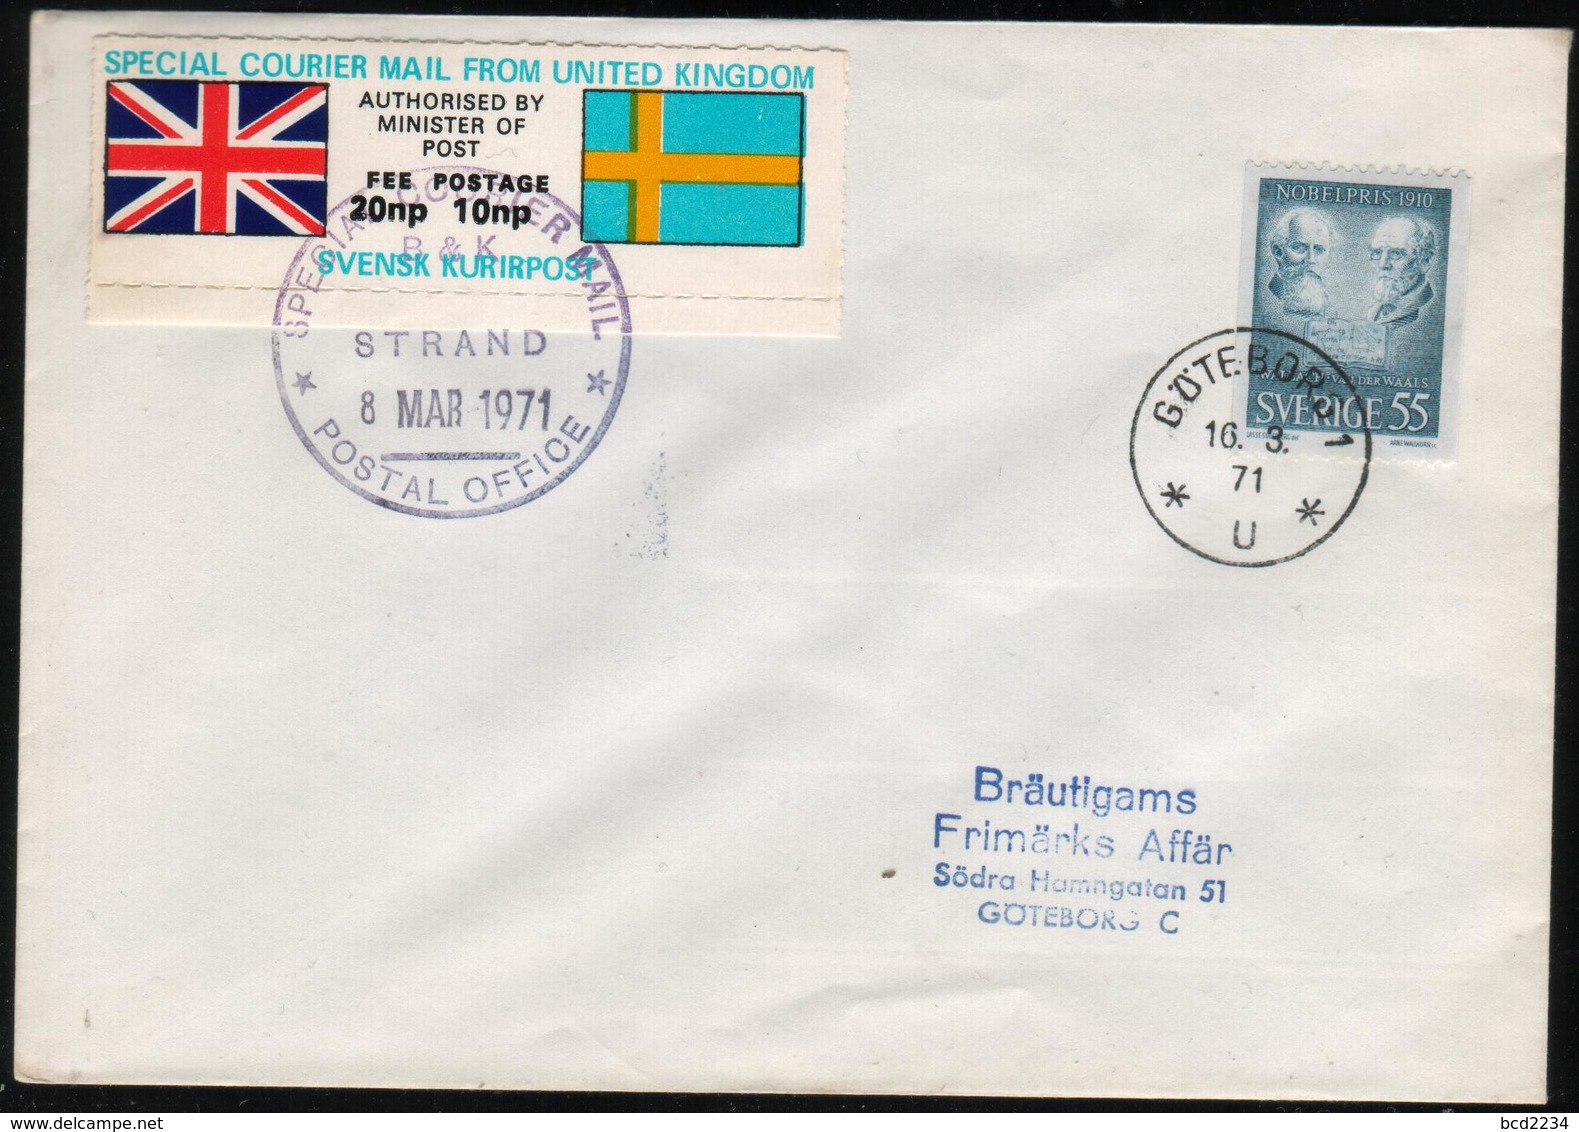 GREAT BRITAIN GB 1971 POSTAL STRIKE MAIL SPECIAL COURIER MAIL 2ND ISSUE DECIMAL COVER TO GOTEBORG SWEDEN 8 MARCH - Errors, Freaks & Oddities (EFO)